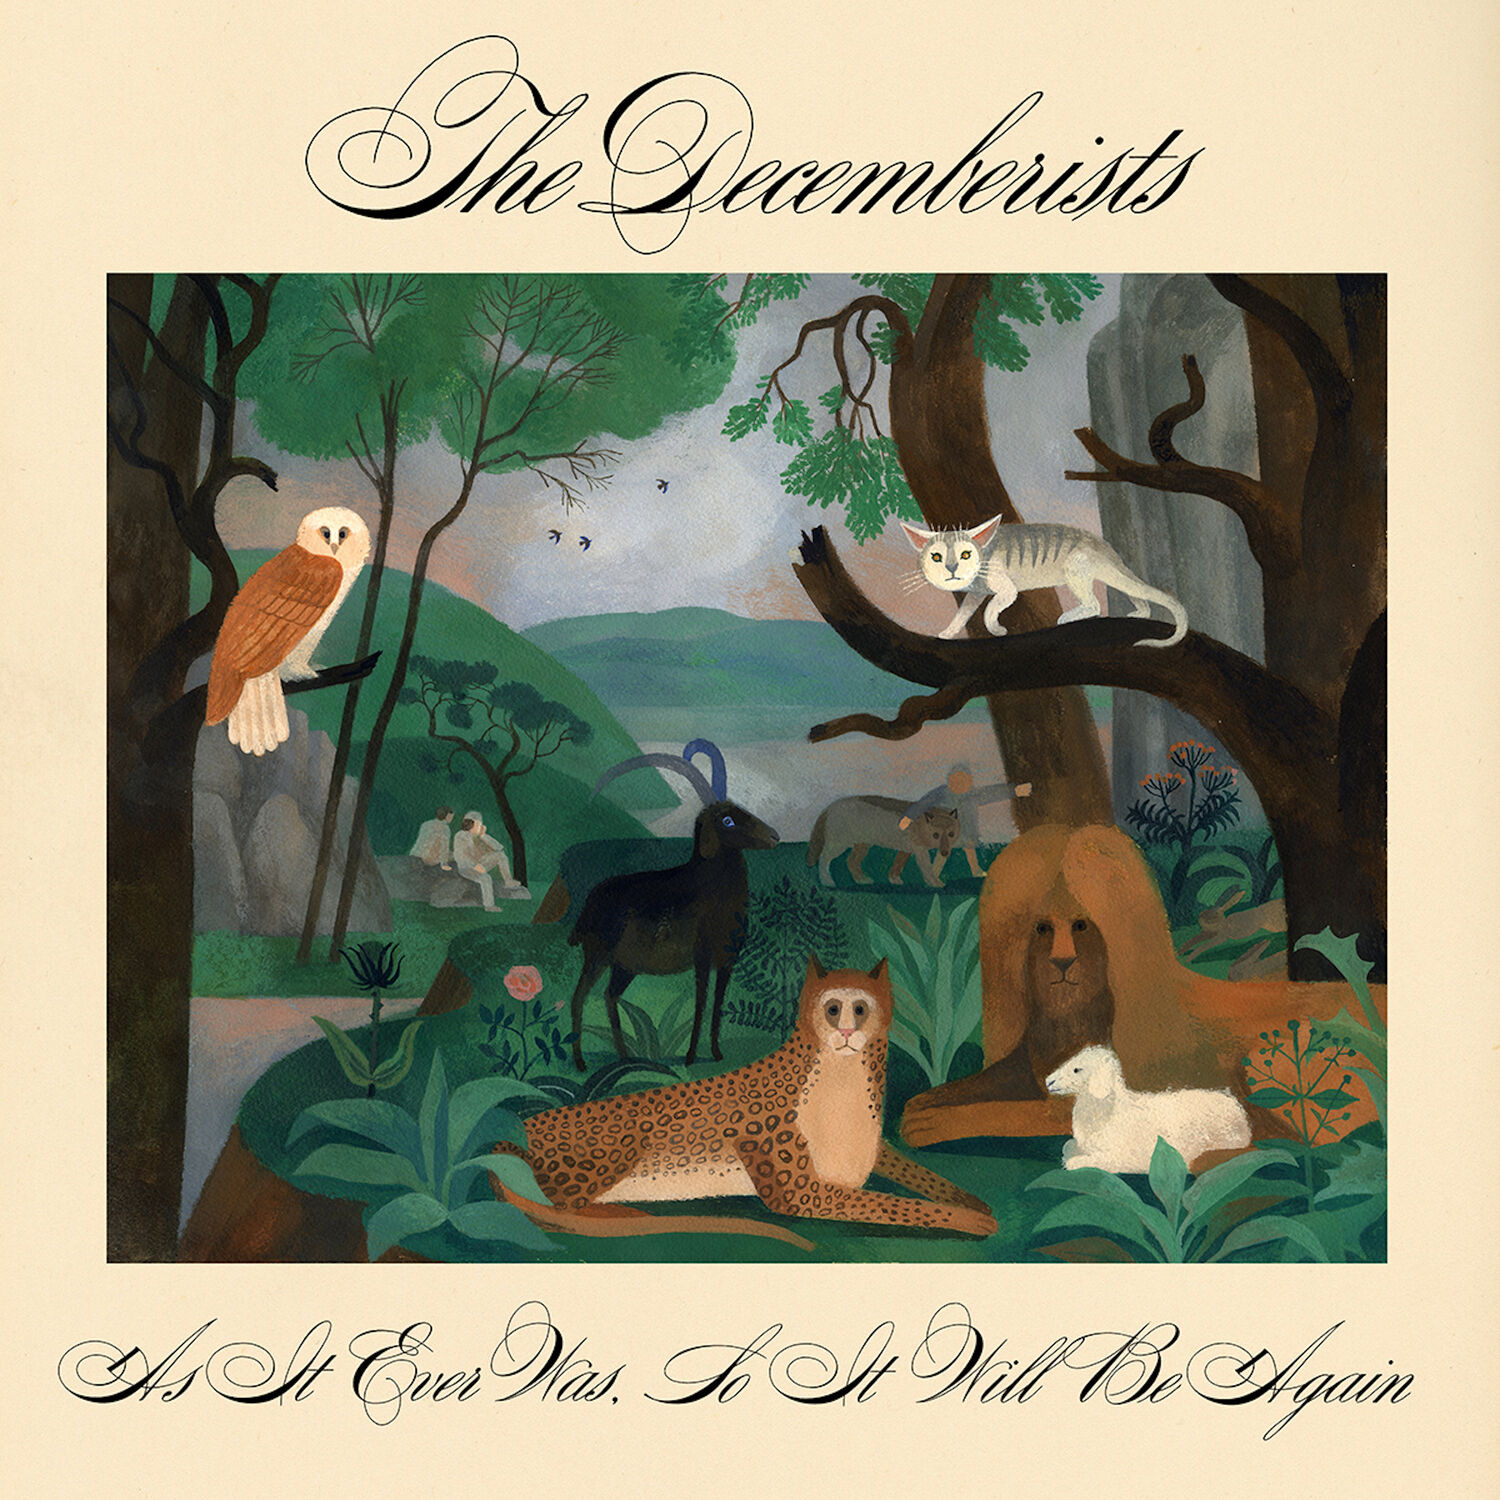 The Decemberists - 2024 - As It Ever Was, So It Will Be Again (24-96)